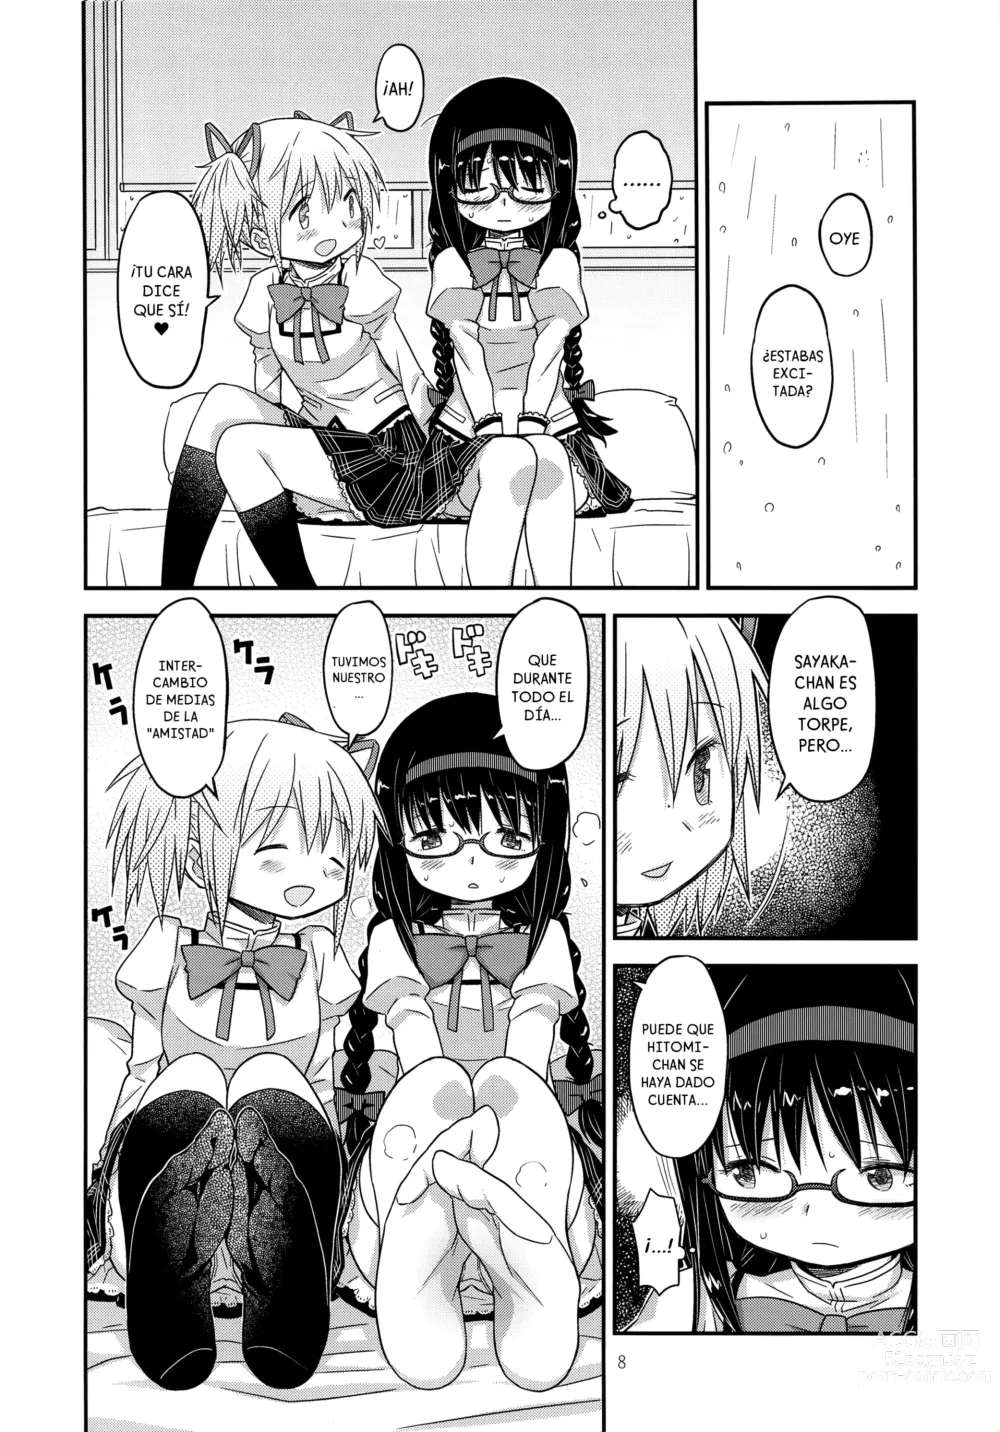 Page 7 of doujinshi Its Time to Fall?